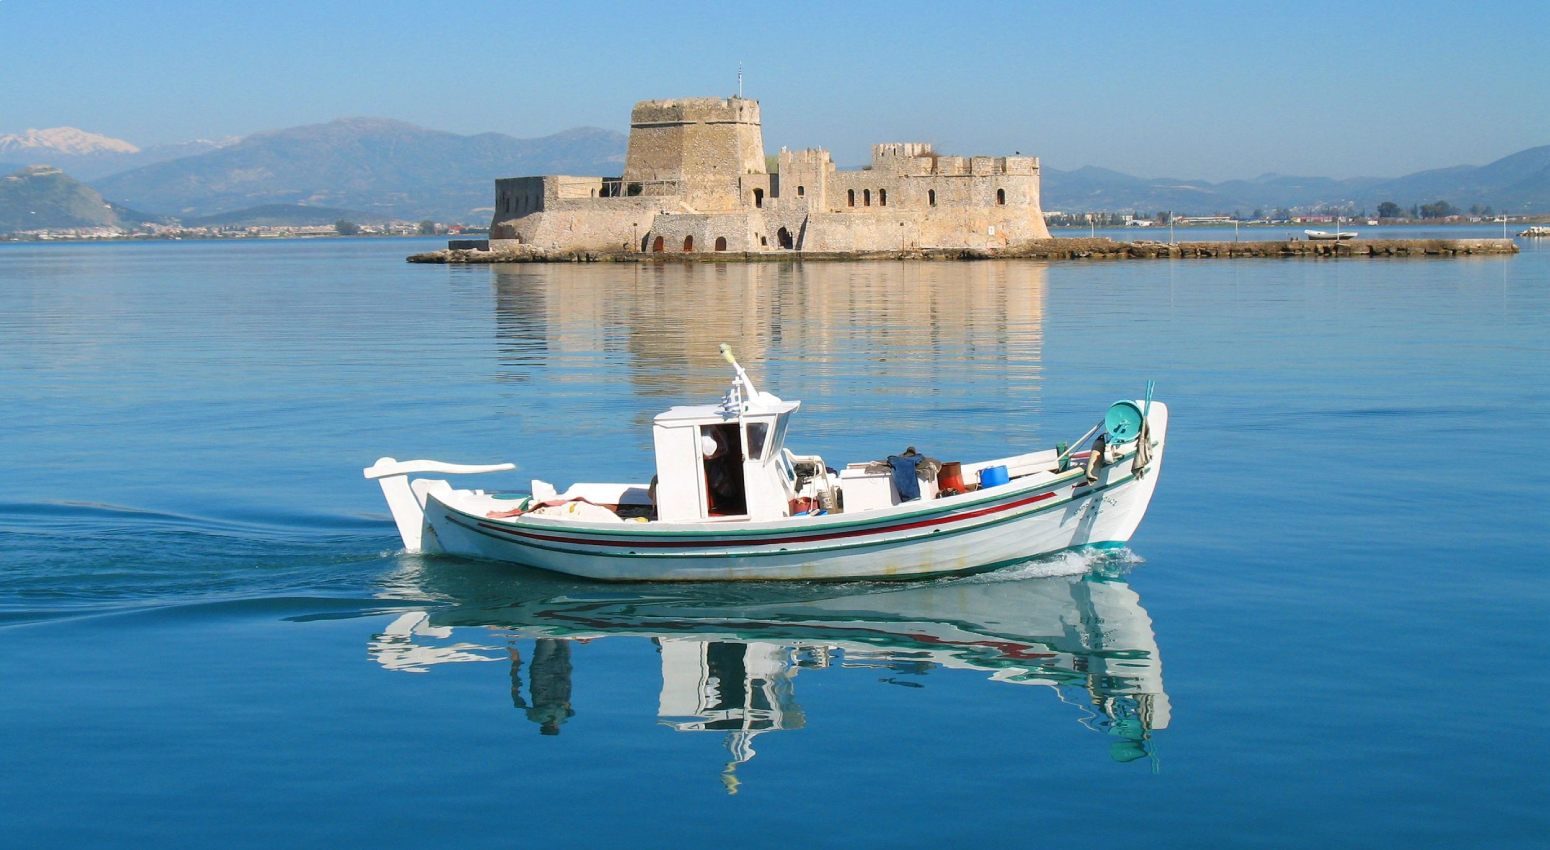 A local boat with Bourtzi Castle in Nafplion in the background